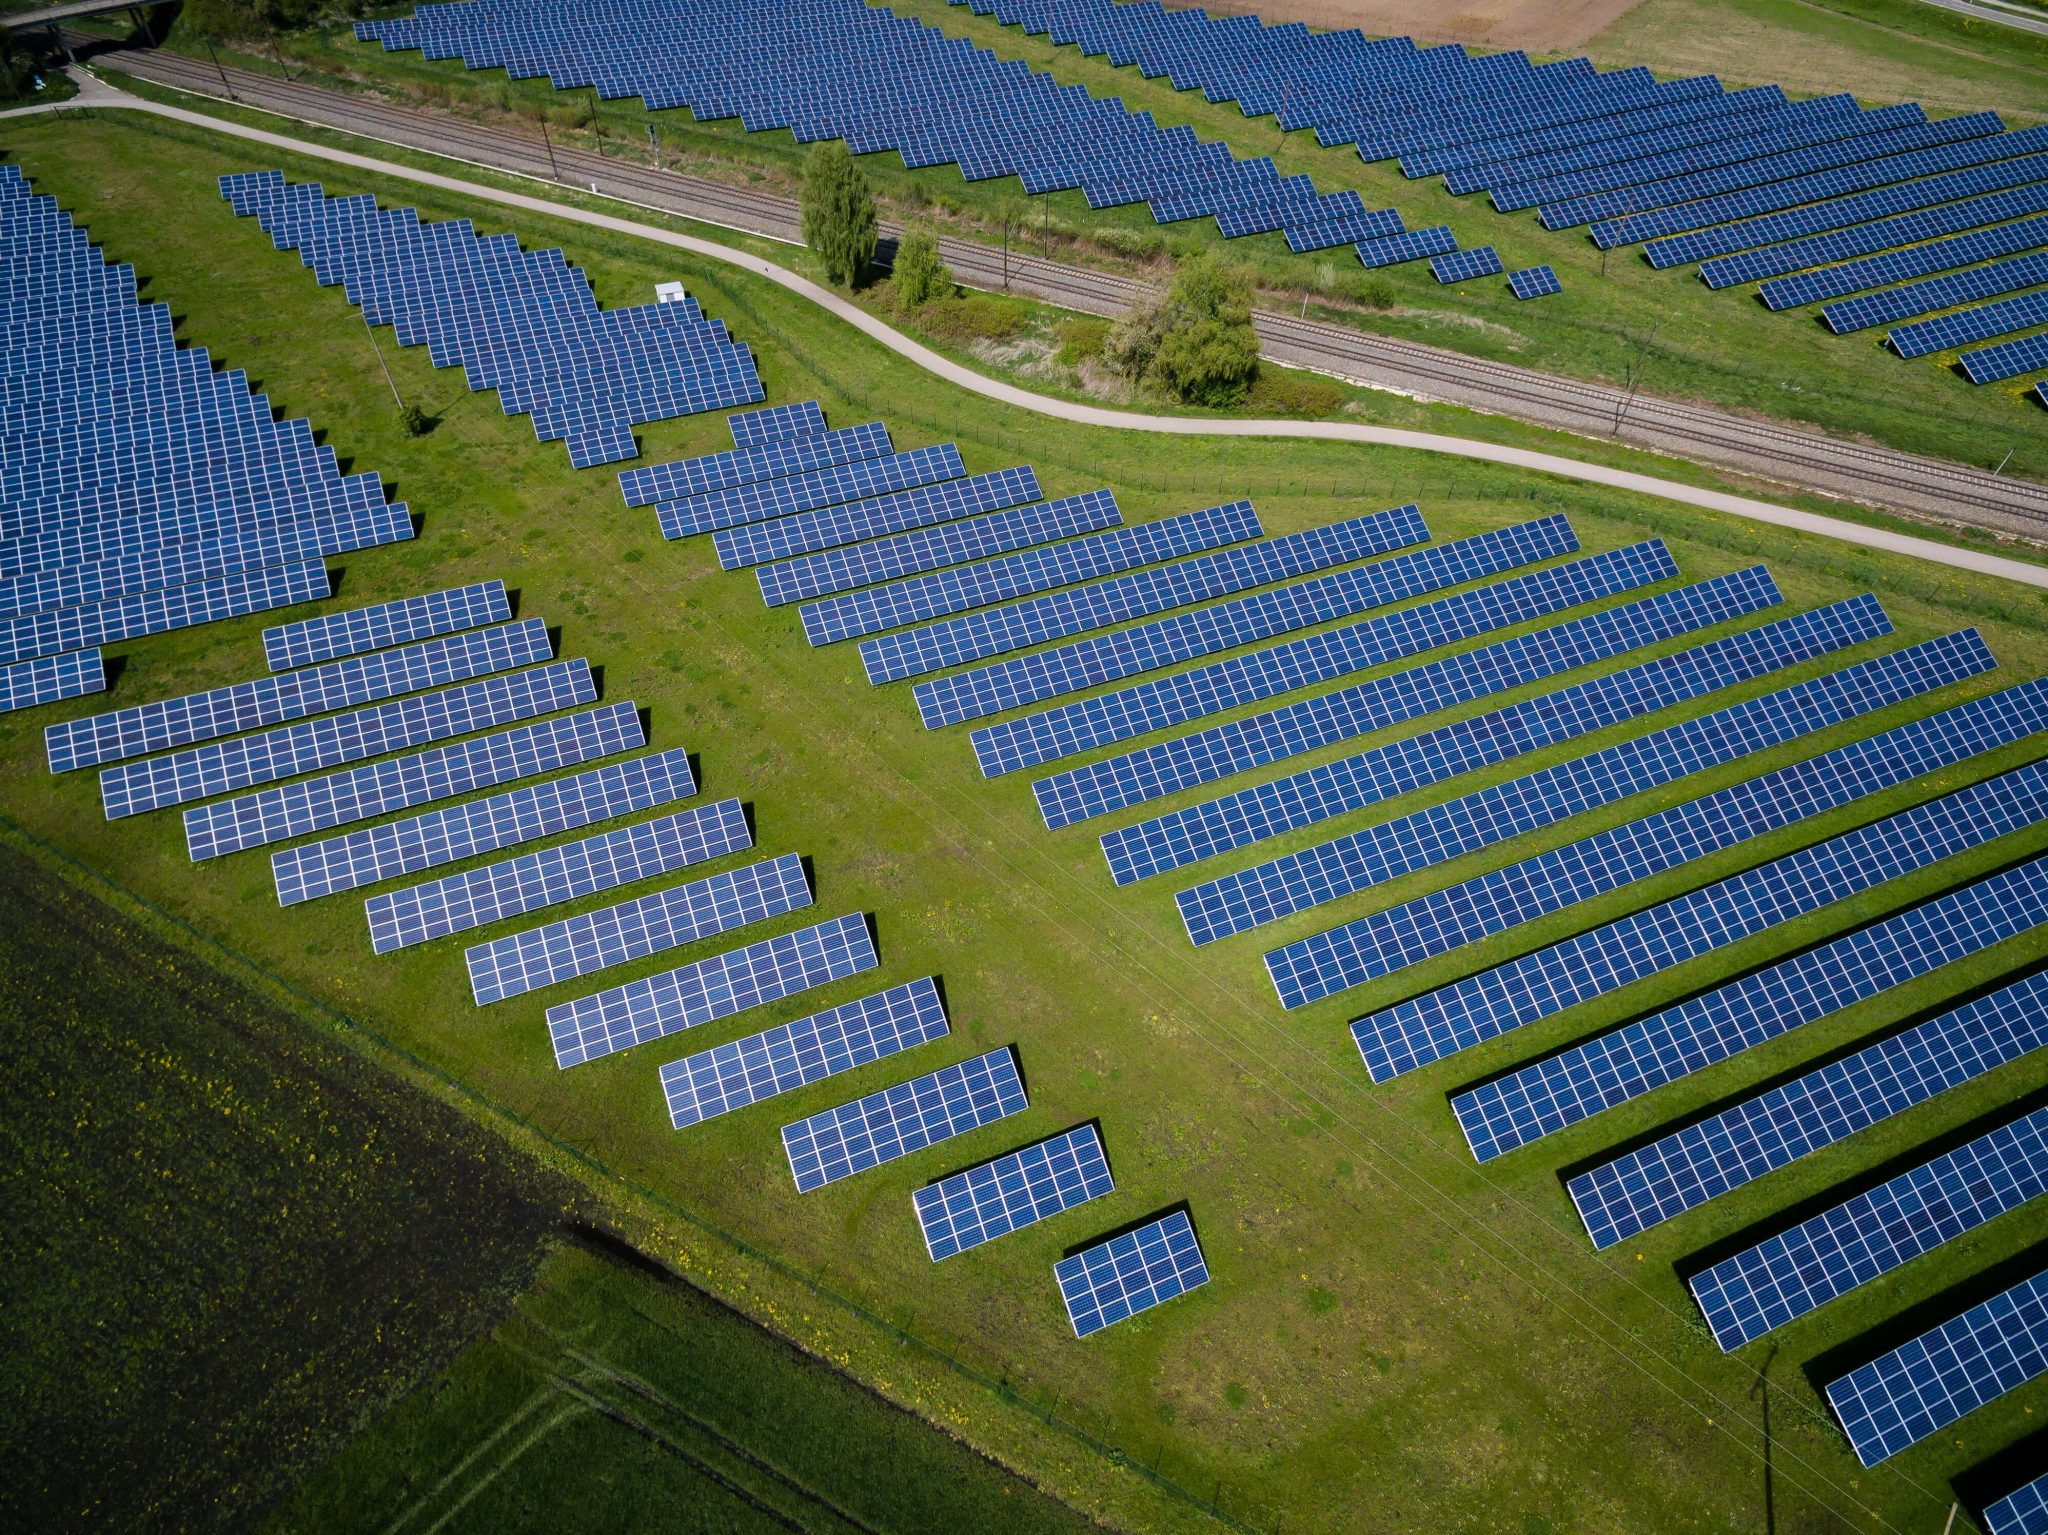 An aerial photo of solar panels on green grass